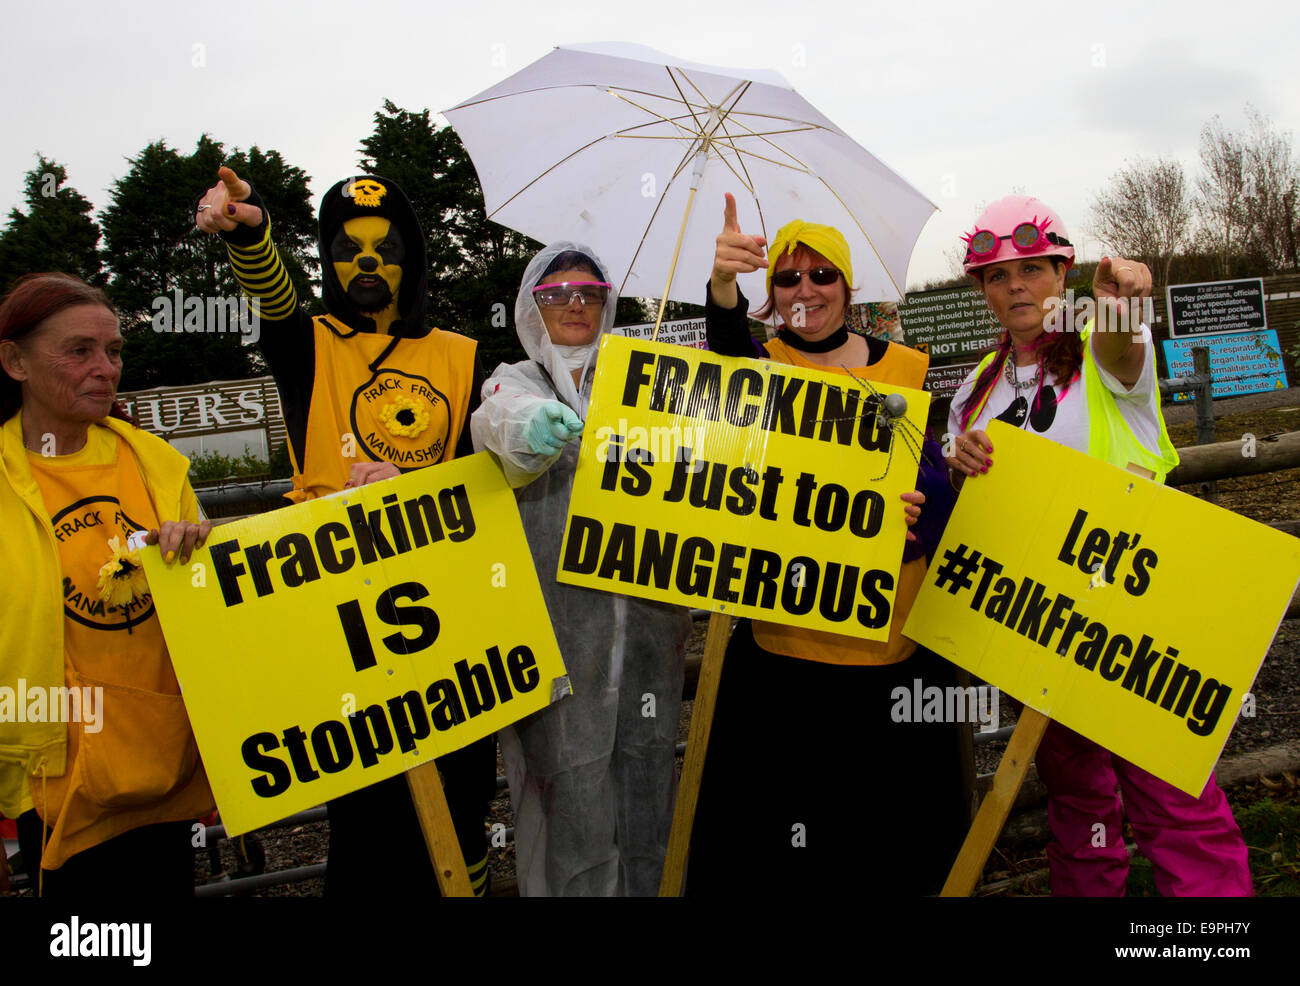 Westby Nr Blackpool, Lancashire 31st October, 2014. Frack Free Lancashire Local Residents opposed to proposed fracking demonstrate in Fancy Dress outside Maple Farm Nursery. The area is filled with Anti-Fracking Signs erected & paid for by local businessman Mr John Toothill, who on his own admission is obsessive about his objection to proposed fracking at nearby Plumpton. Lancashire County Council is considering Cuadrilla’s planning application and they are encountering strong community resistance. Stock Photo